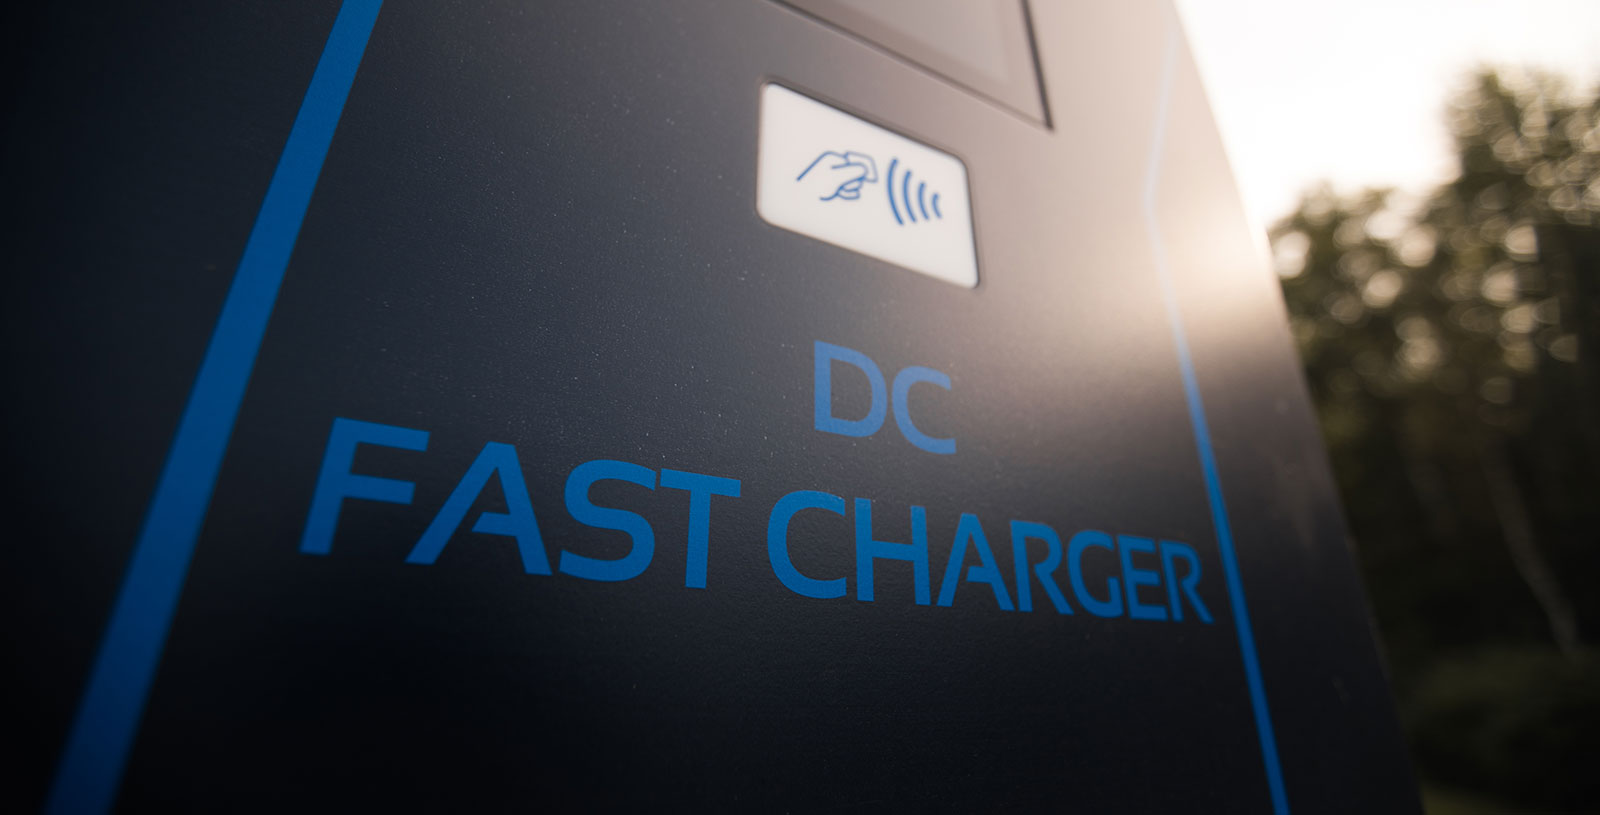 DC fast charging station